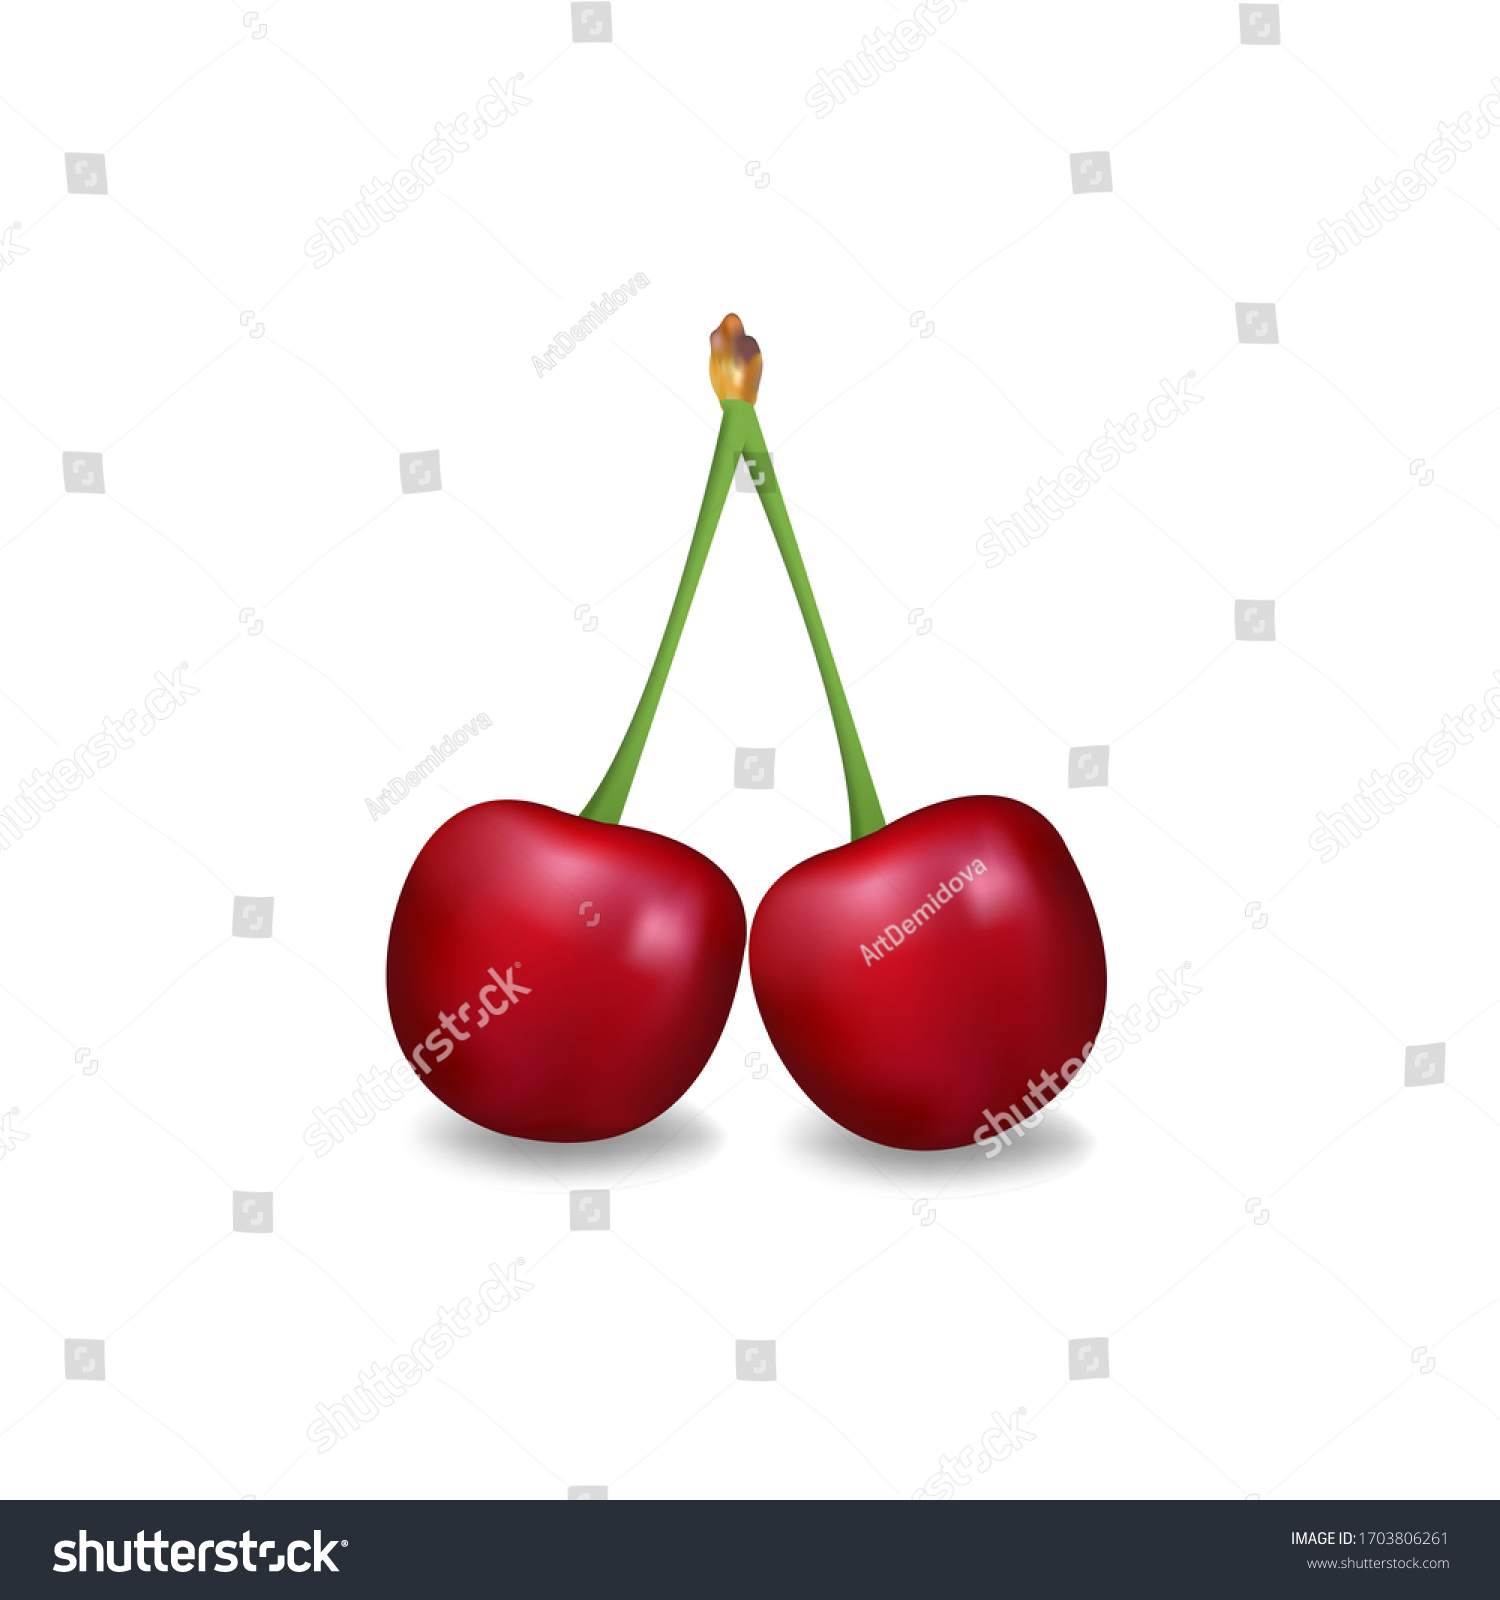 Realistic Vector Cherries Illustration On White Stock Vector Royalty Free 1703806261 2943